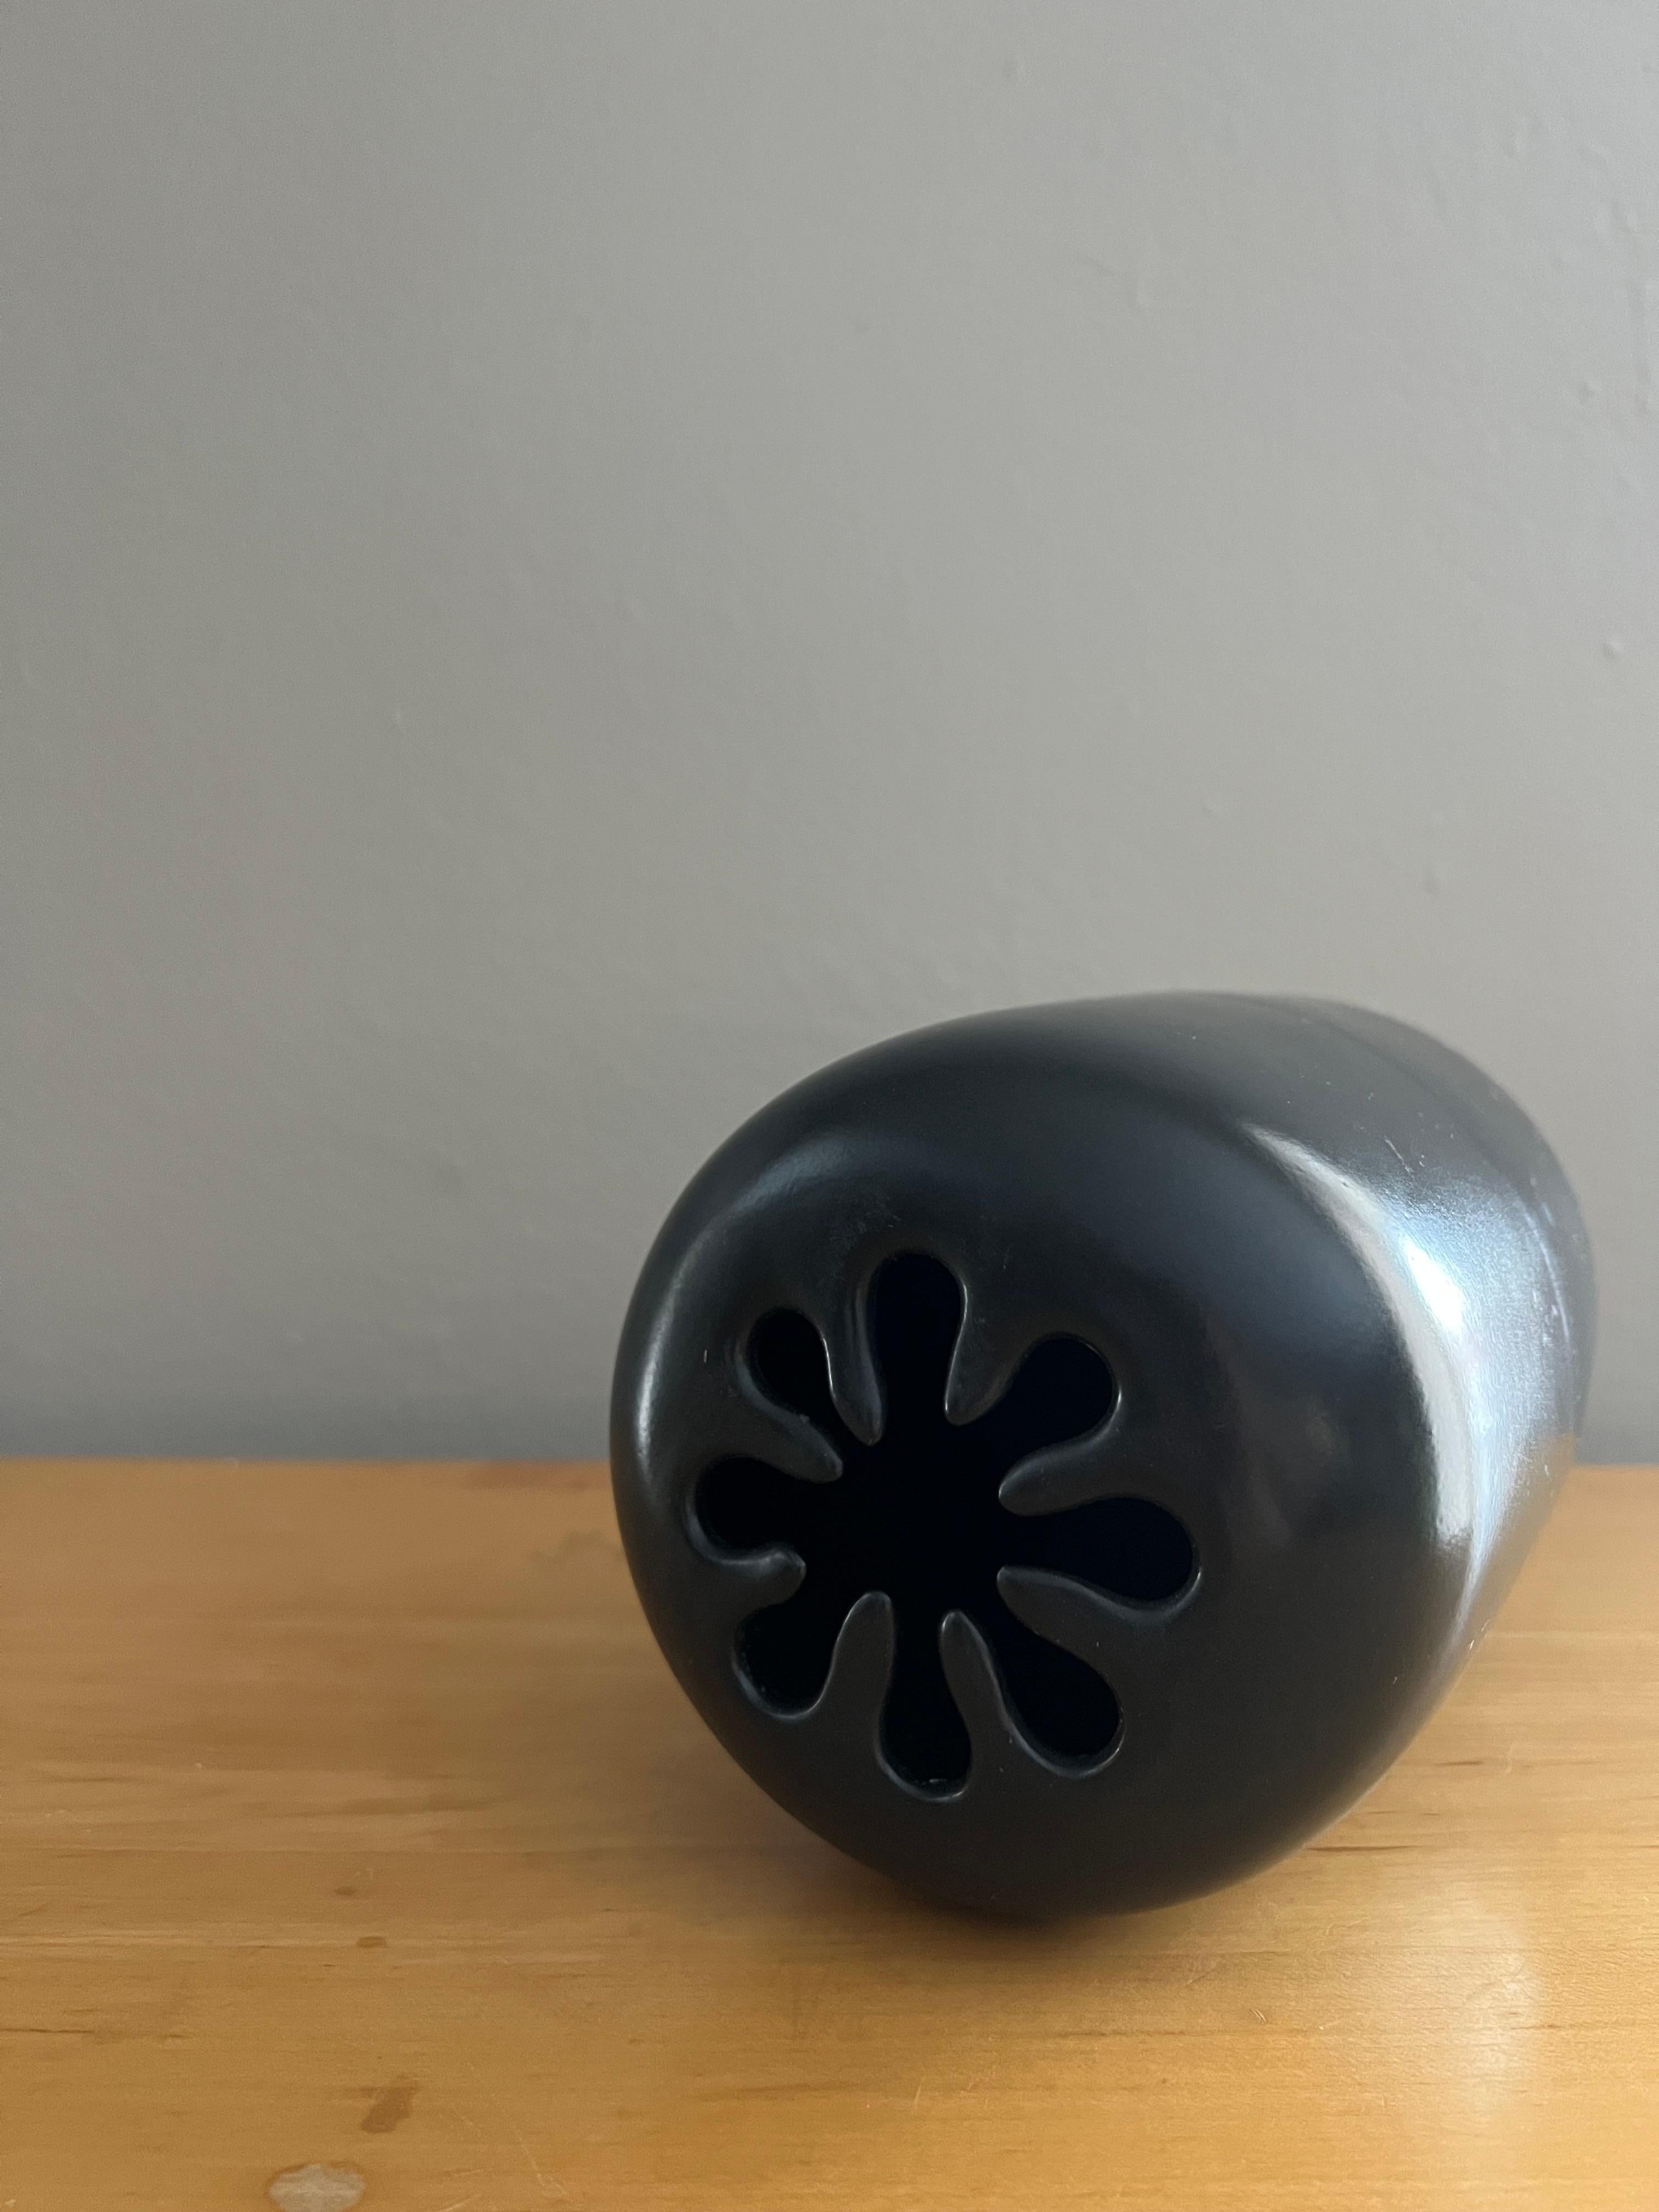 Two tone, black matte on black gloss spark vase by David Gil for Bennington Pottery.

Marked on the bottom. Difficult to capture as it isn't raised enough to be legible.